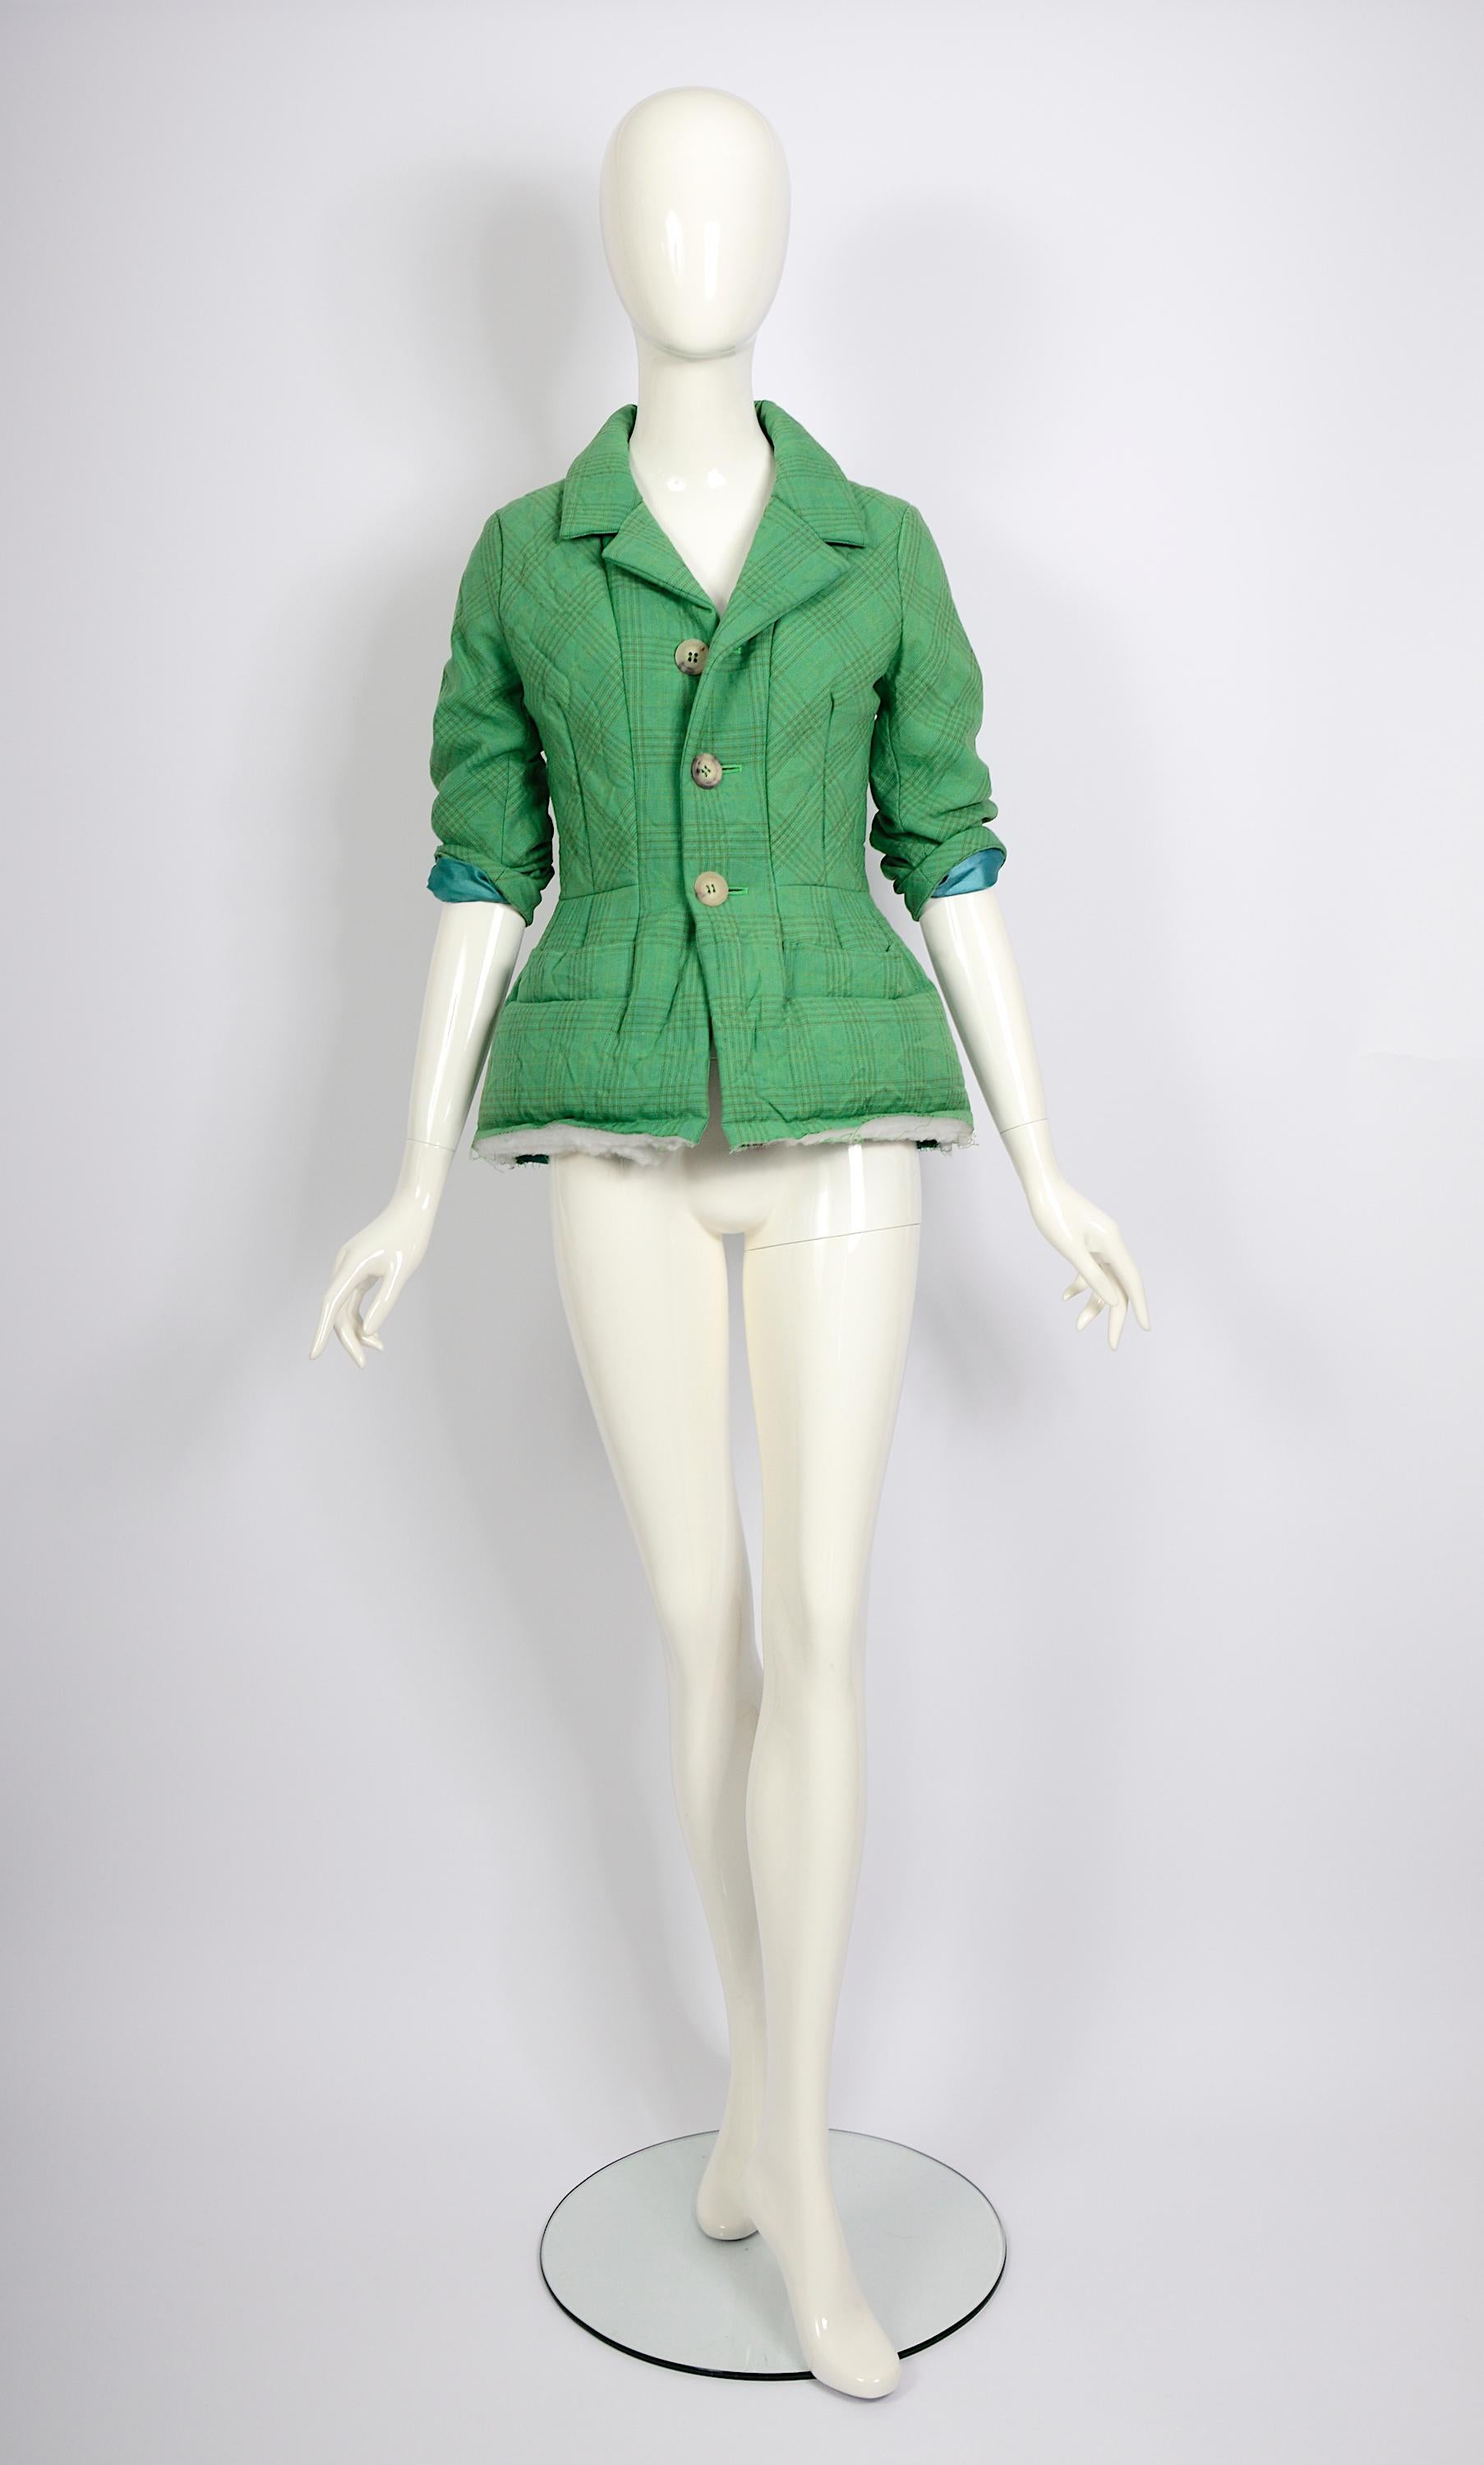 Comme des Garçons by Junya Watanabe vintage FW 2004 green padded basque jacket   For Sale 6